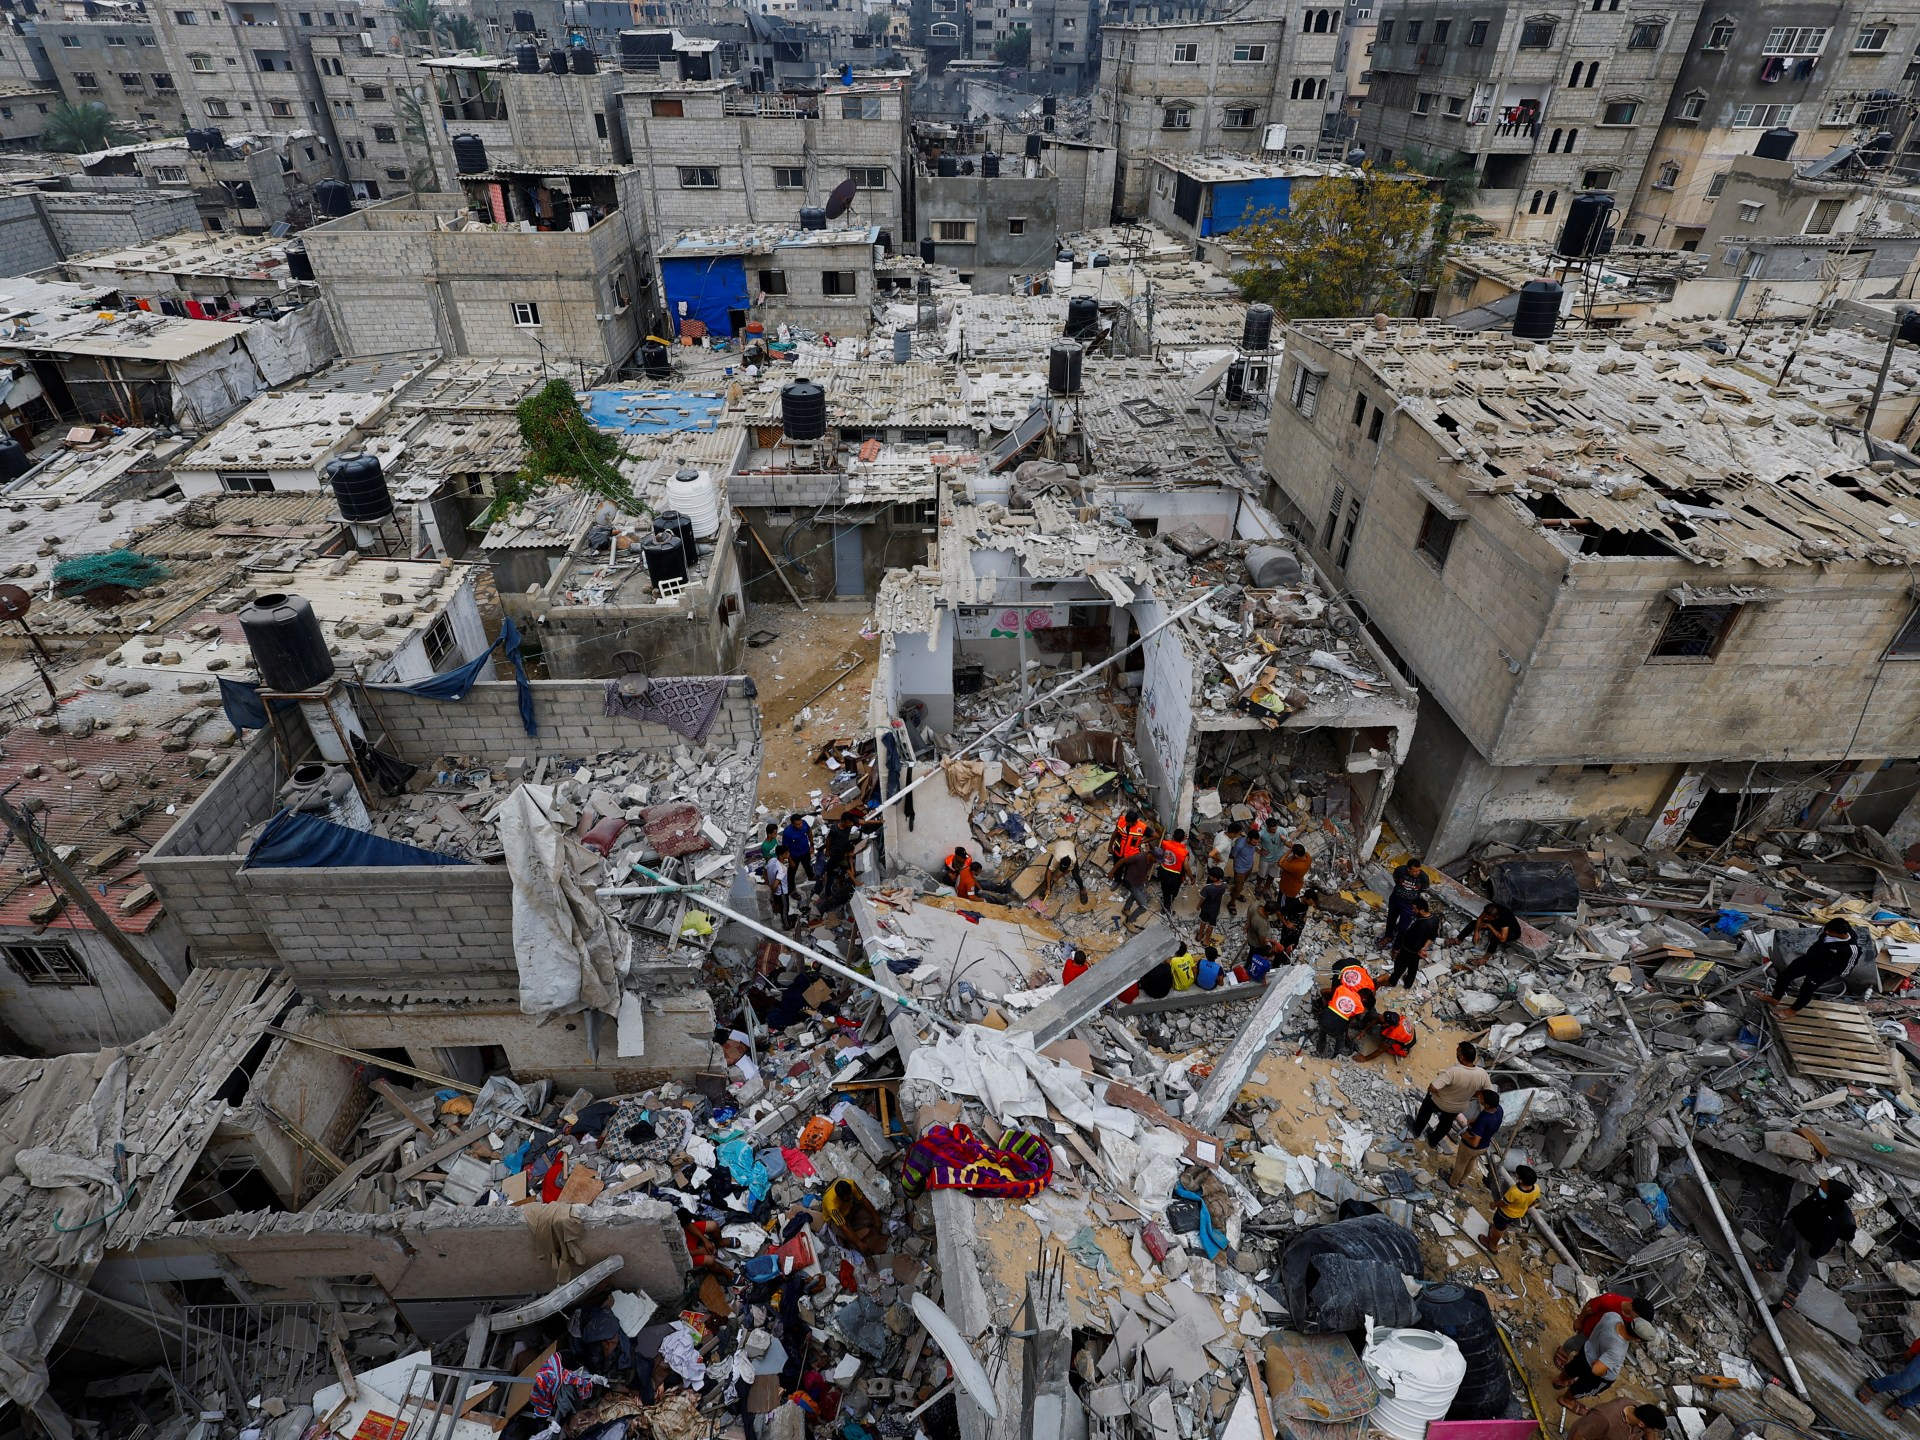 Obstructing aid to Gaza could be a crime under ICC jurisdiction, prosecutors say |  News on the Israeli-Palestinian conflict